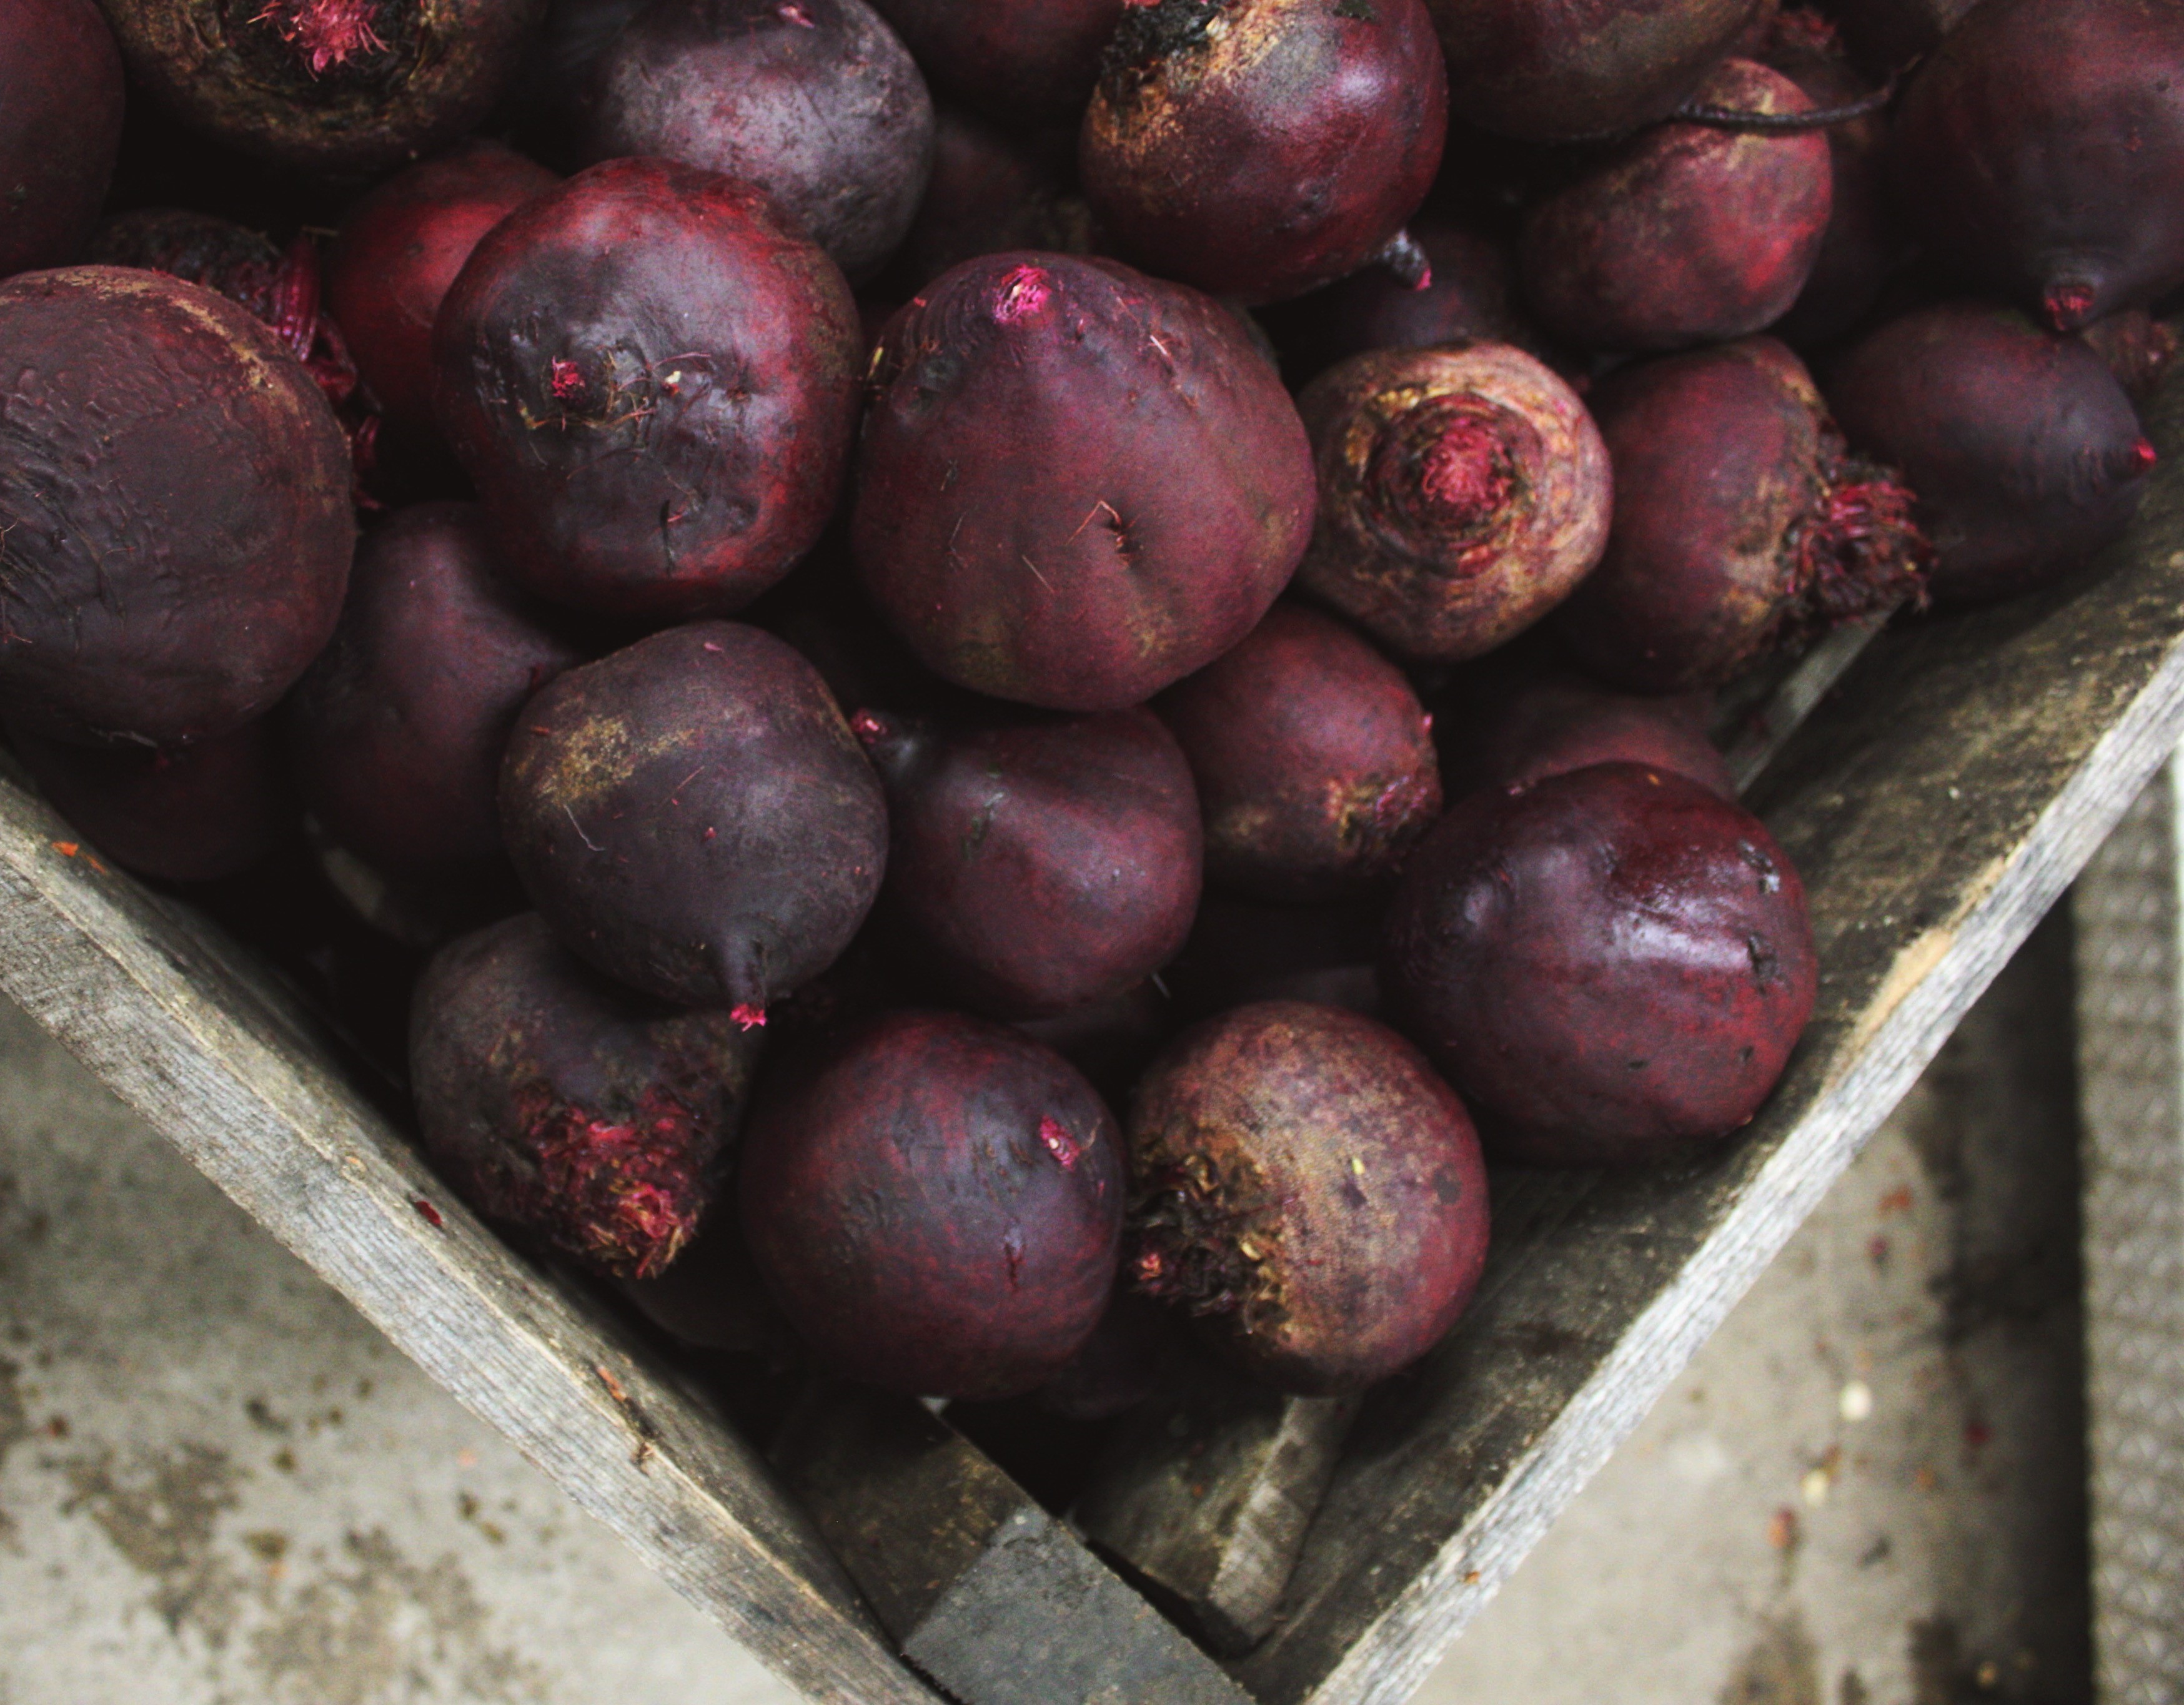 The “What’s” and “How’s” of Beets